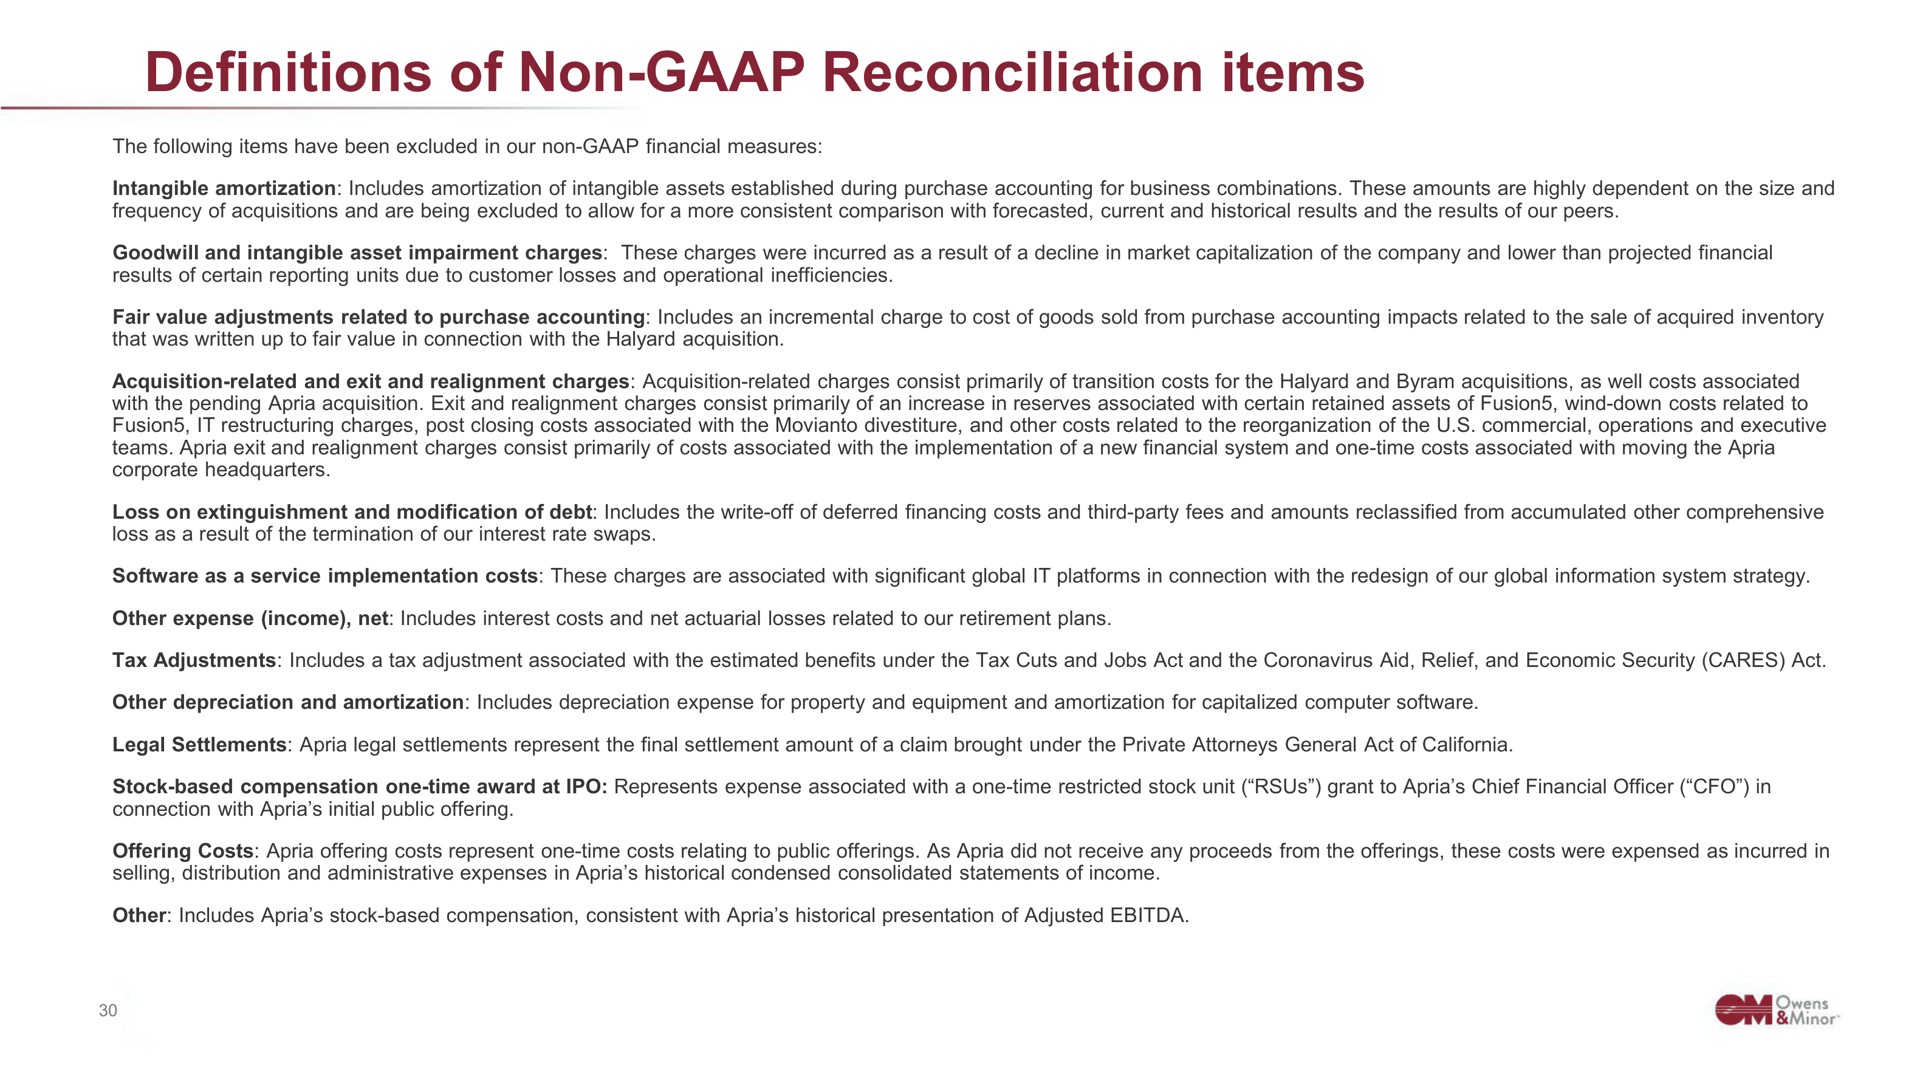 definitions of non reconciliation items | Owens&Minor